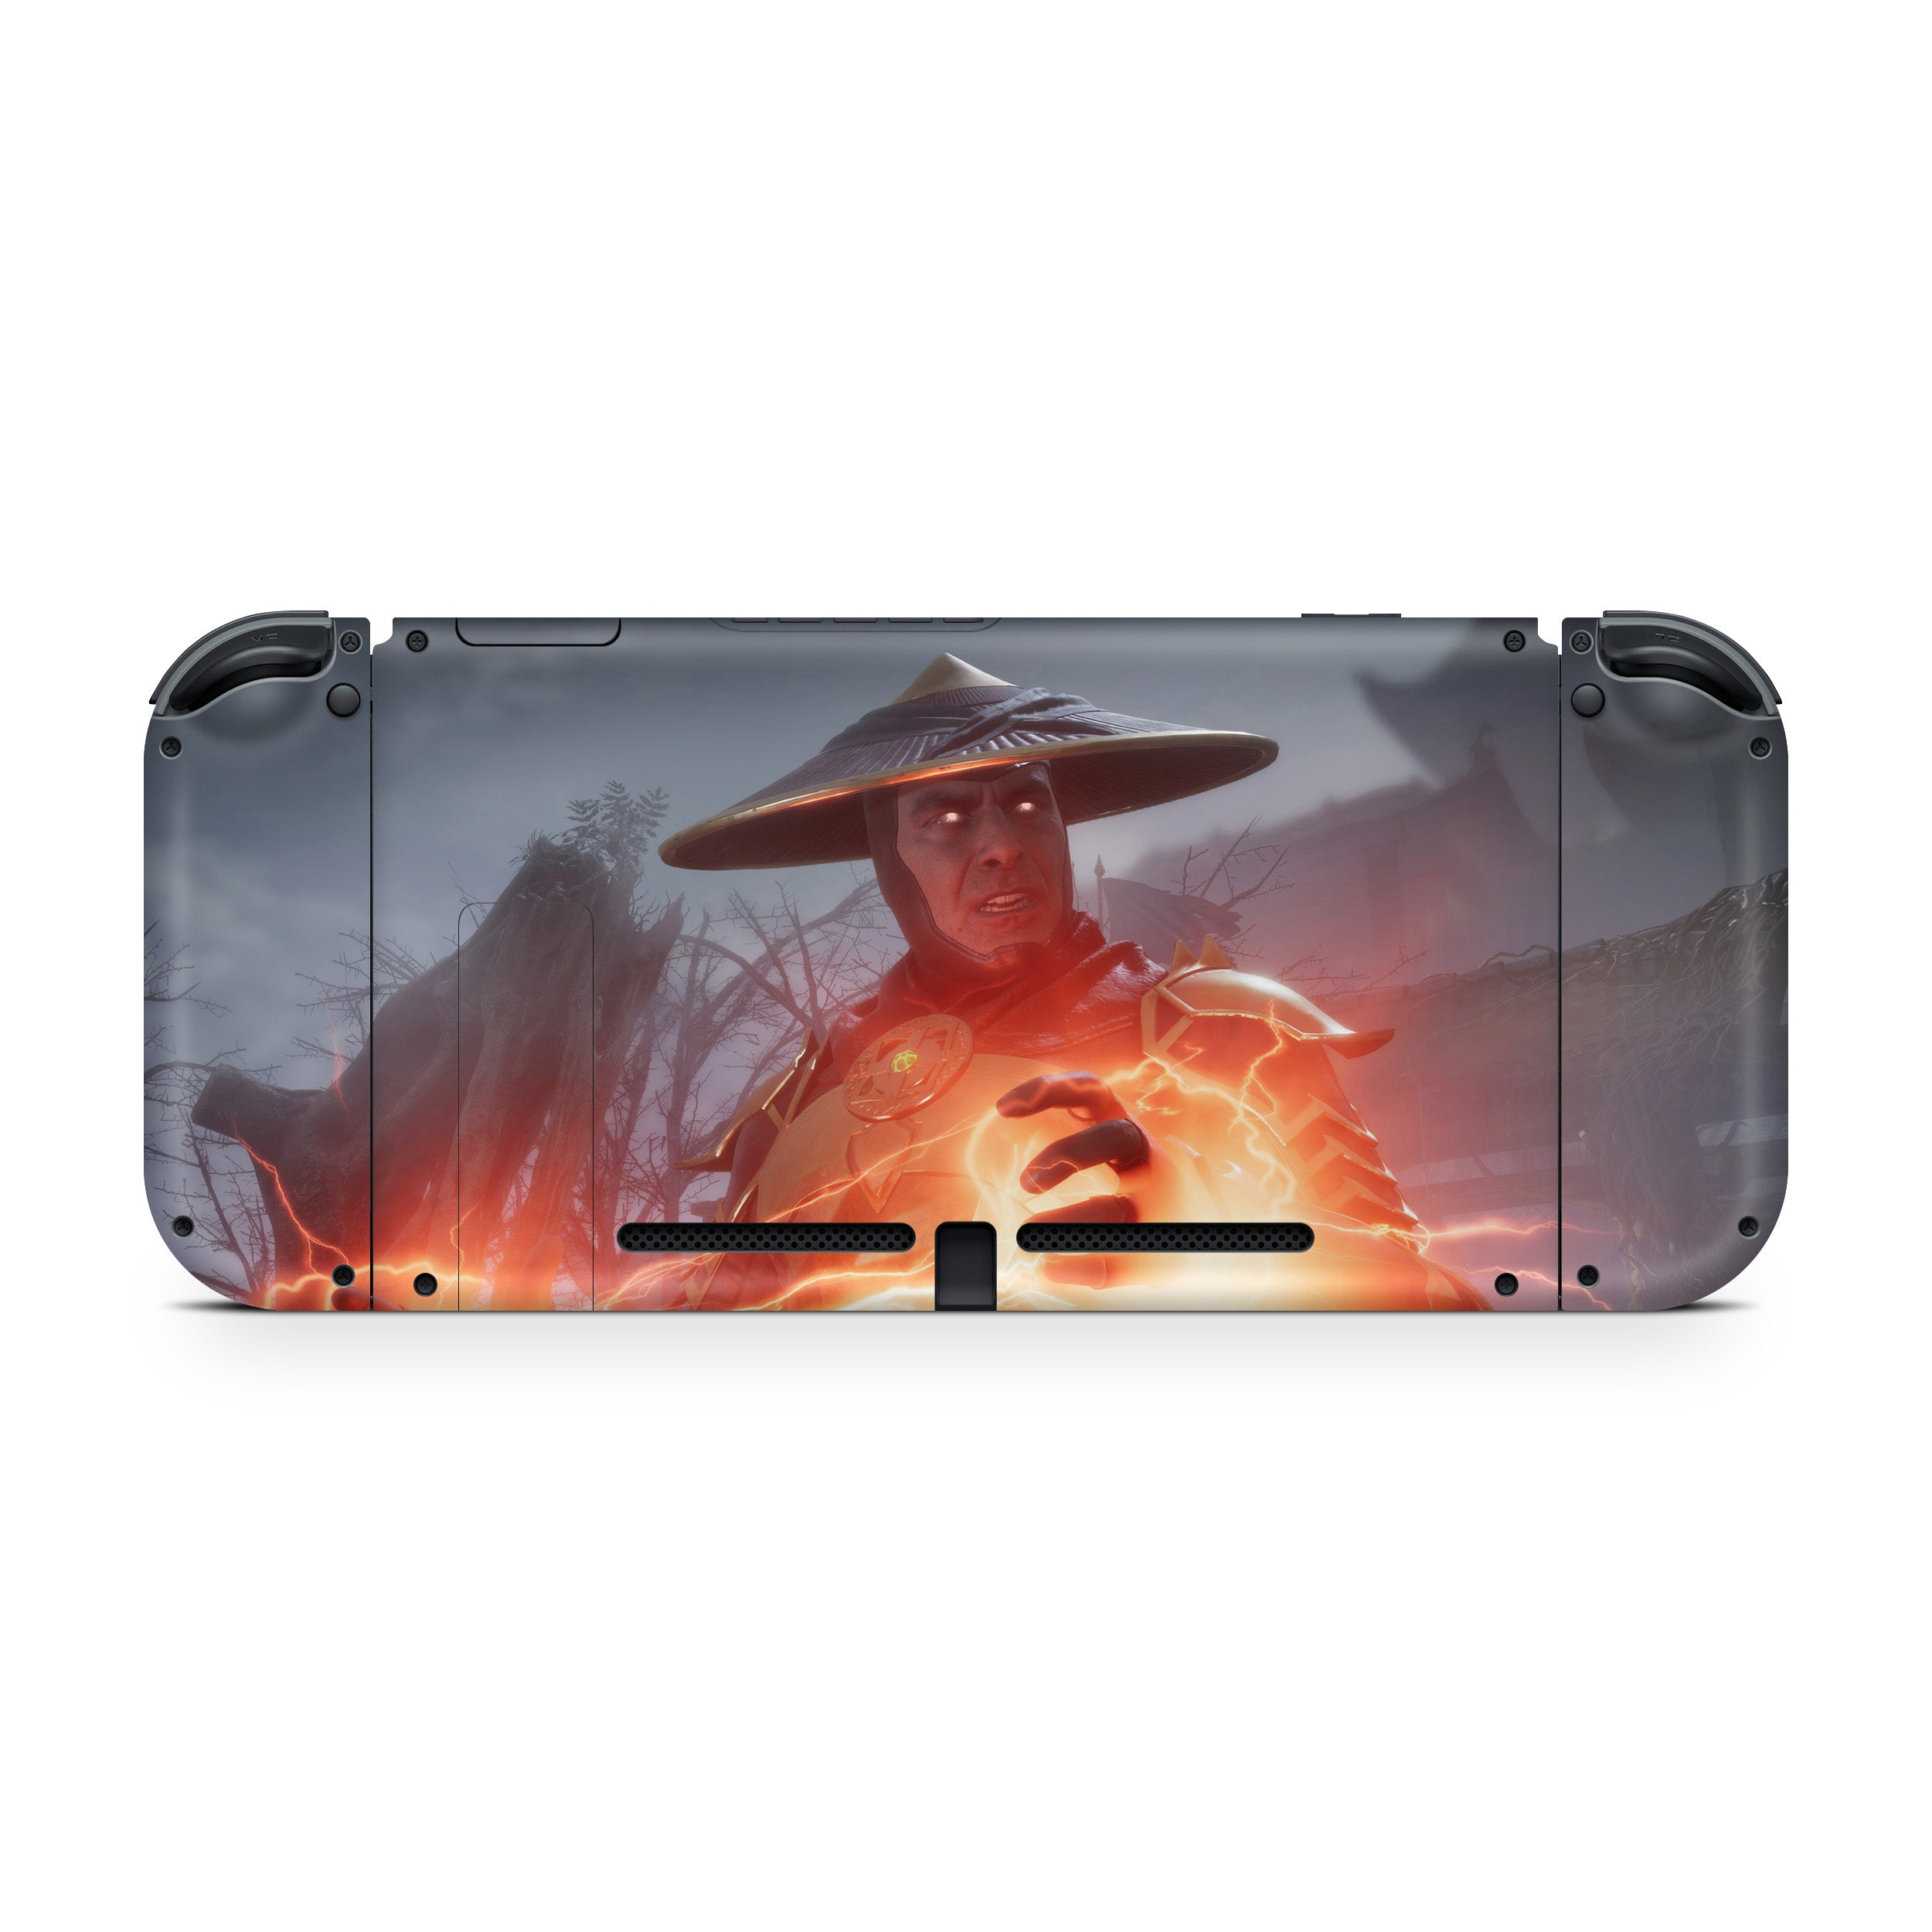 A video game skin featuring a Mortal Kombat 11 Raiden design for the Nintendo Switch.